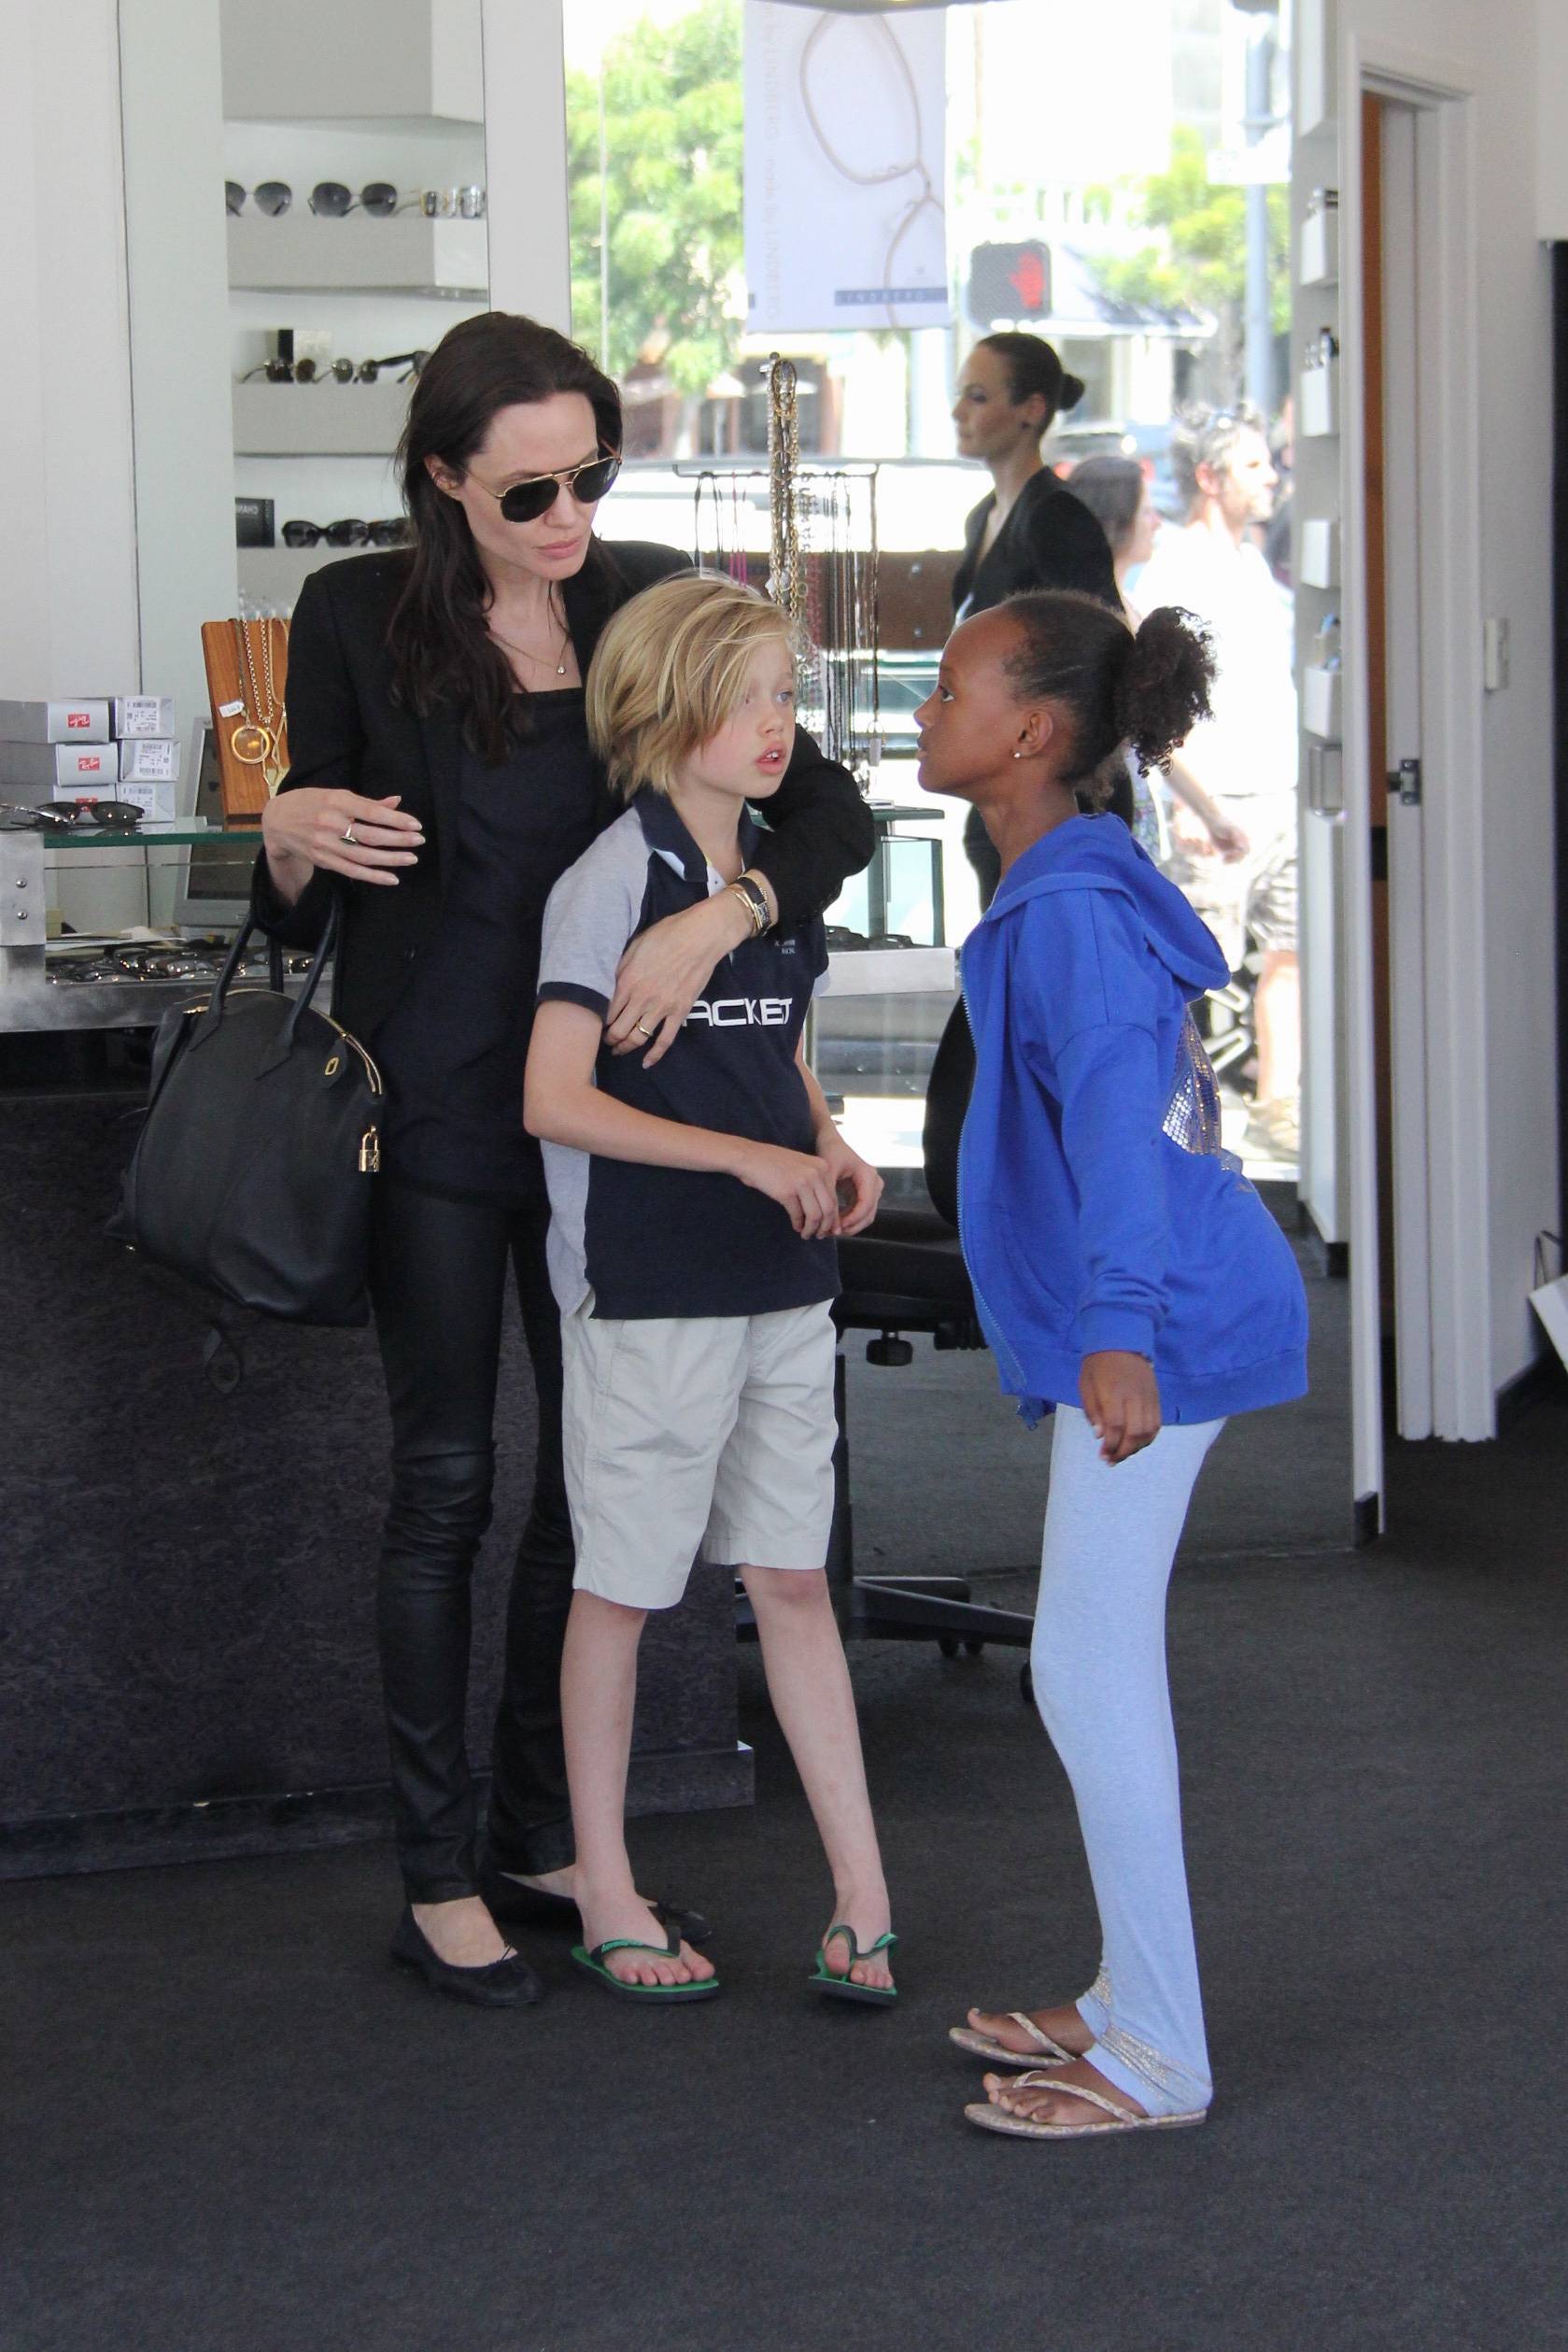 EXCLUSIVE Angelina Jolie goes shopping for sunglasses at Optometrix with two of her children, Shiloh and Zahara Jolie-Pitt